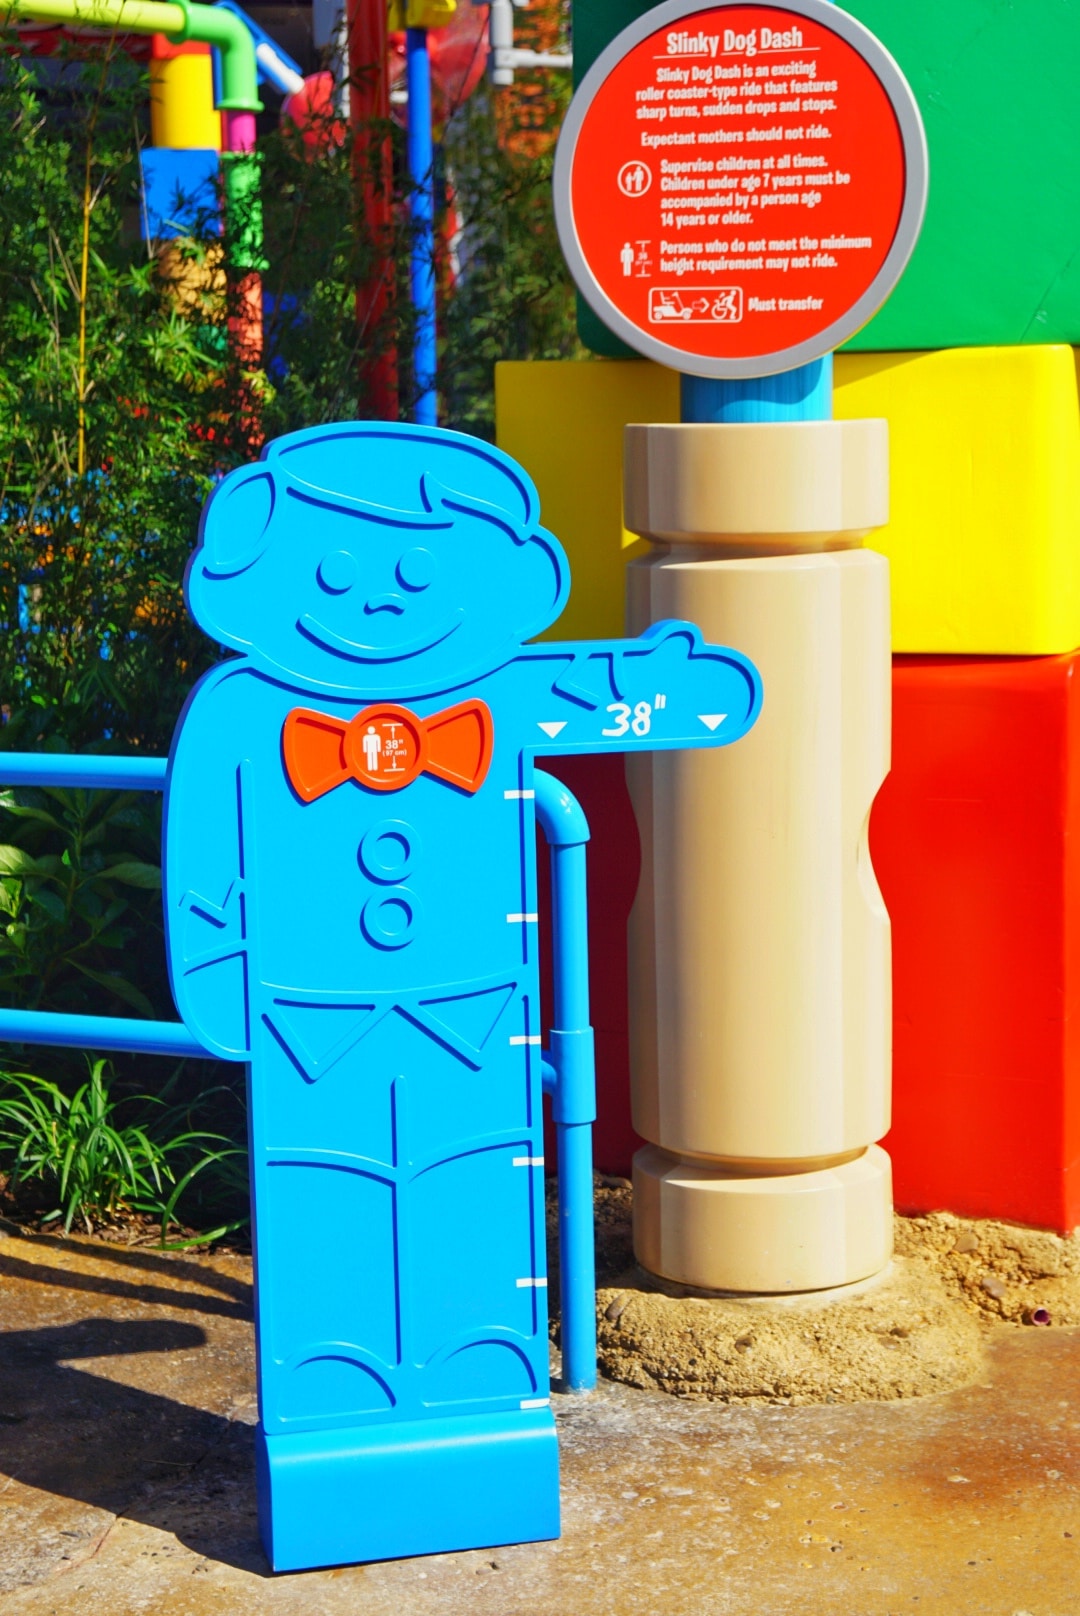 Ride height requirement sign in Toy Story Land